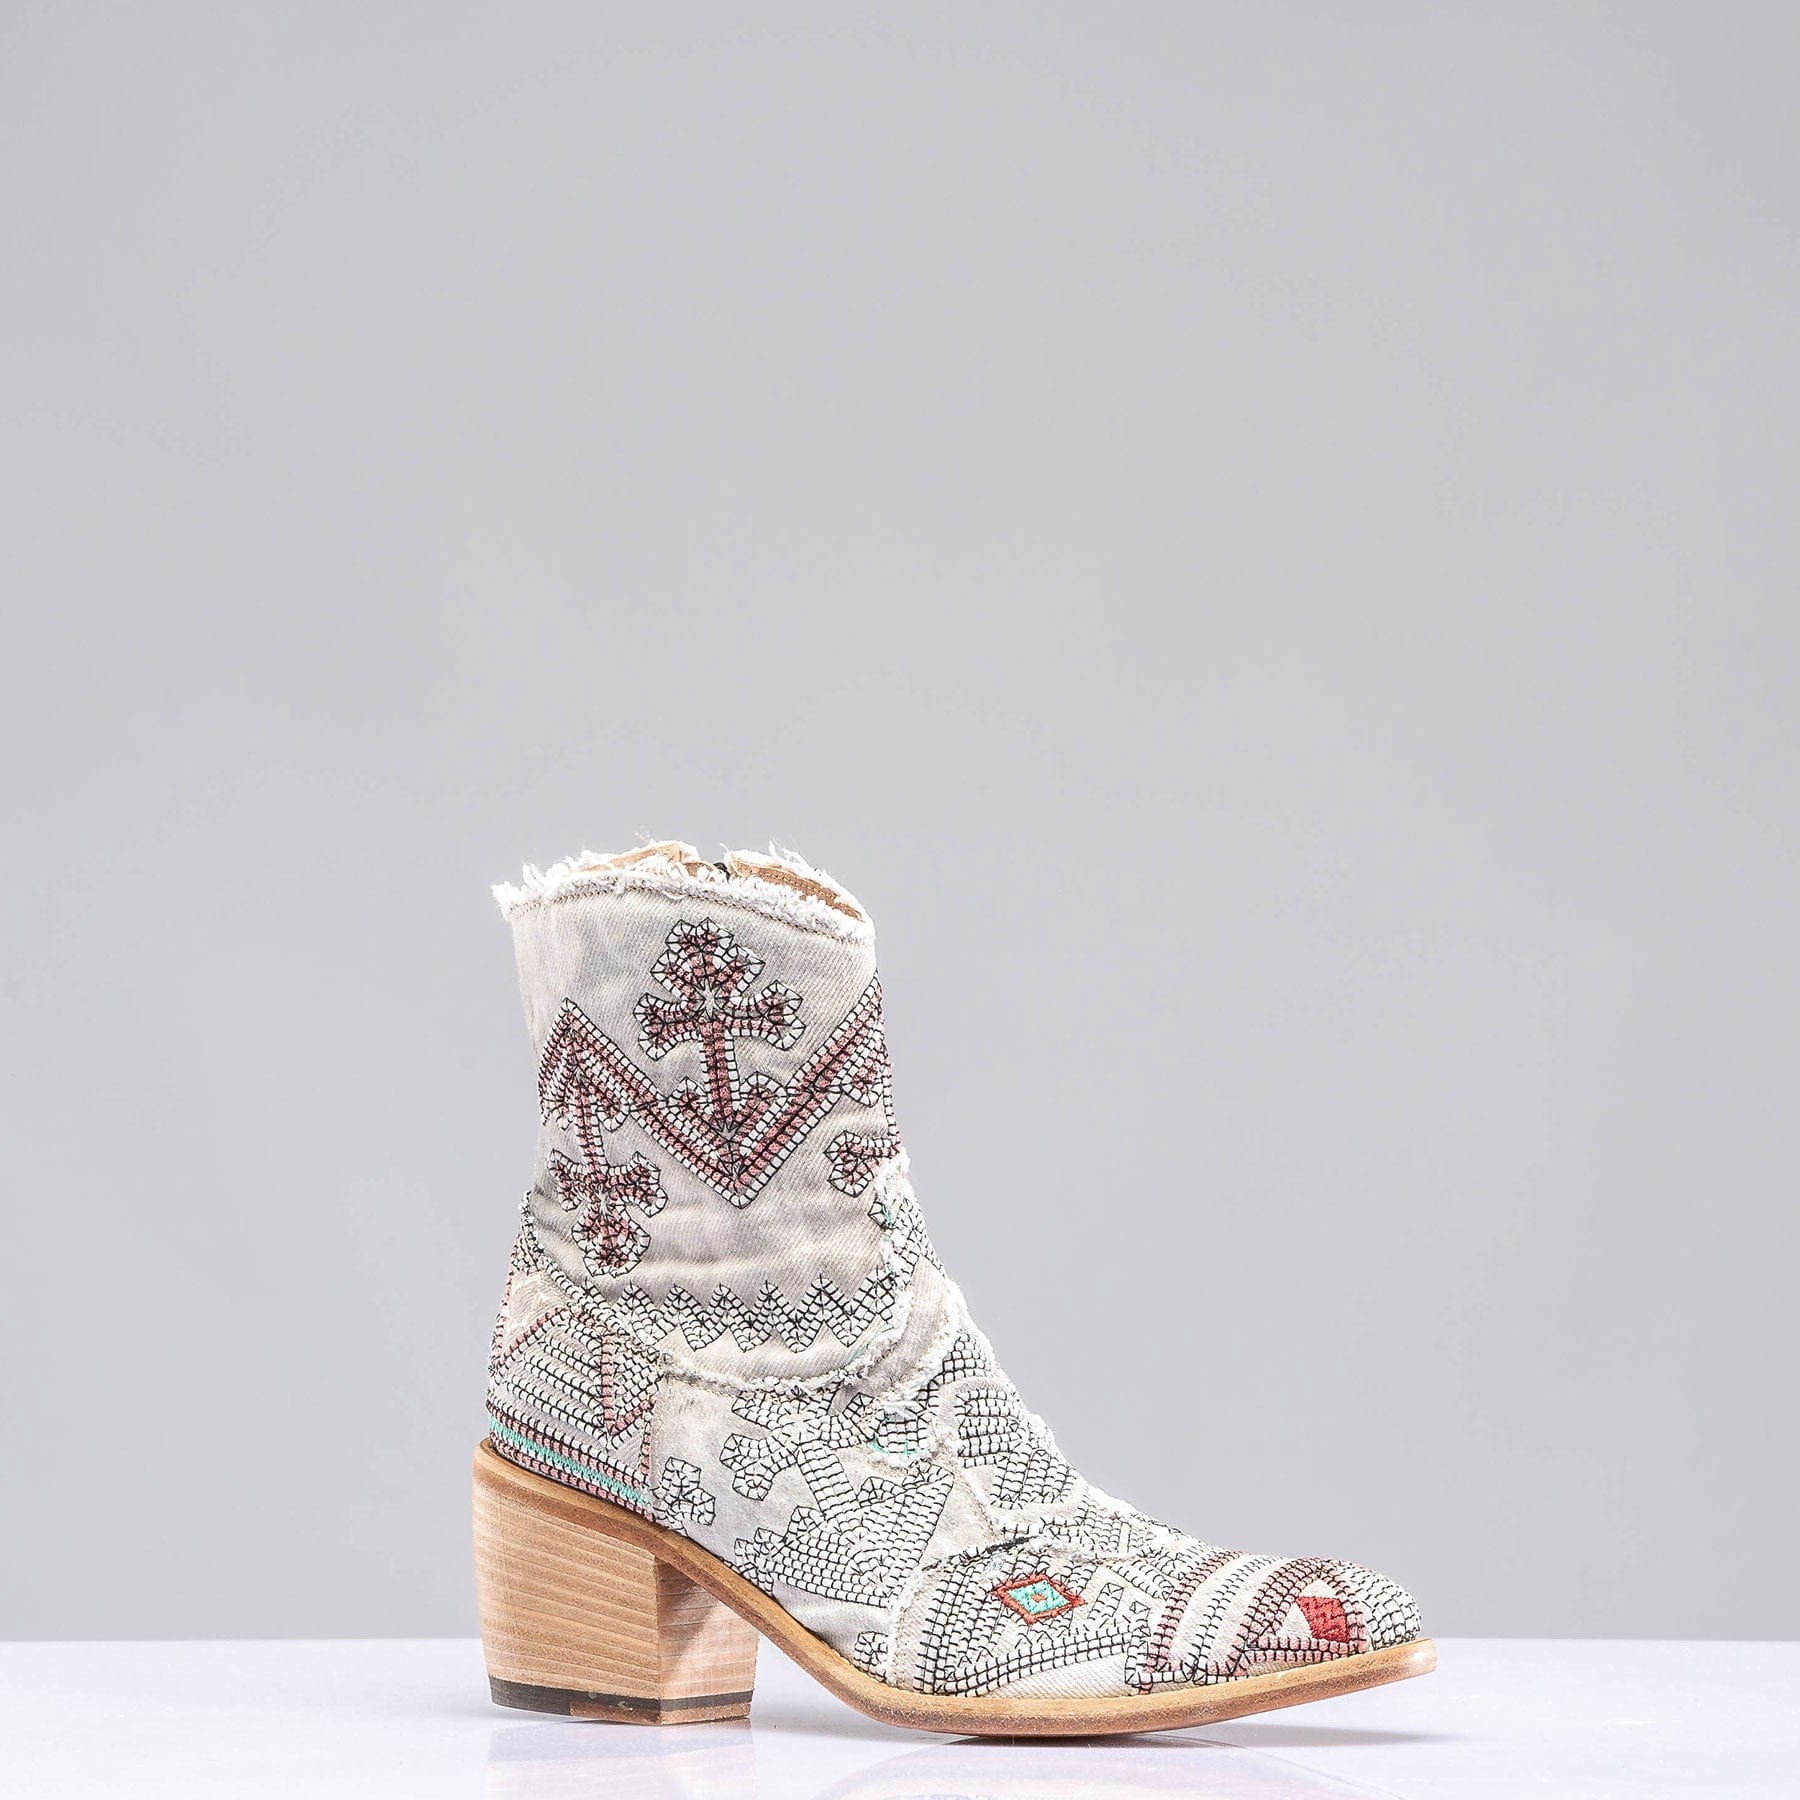 Minerva Boot In White W/ Blk &amp; Pink Embroidery - AXEL'S